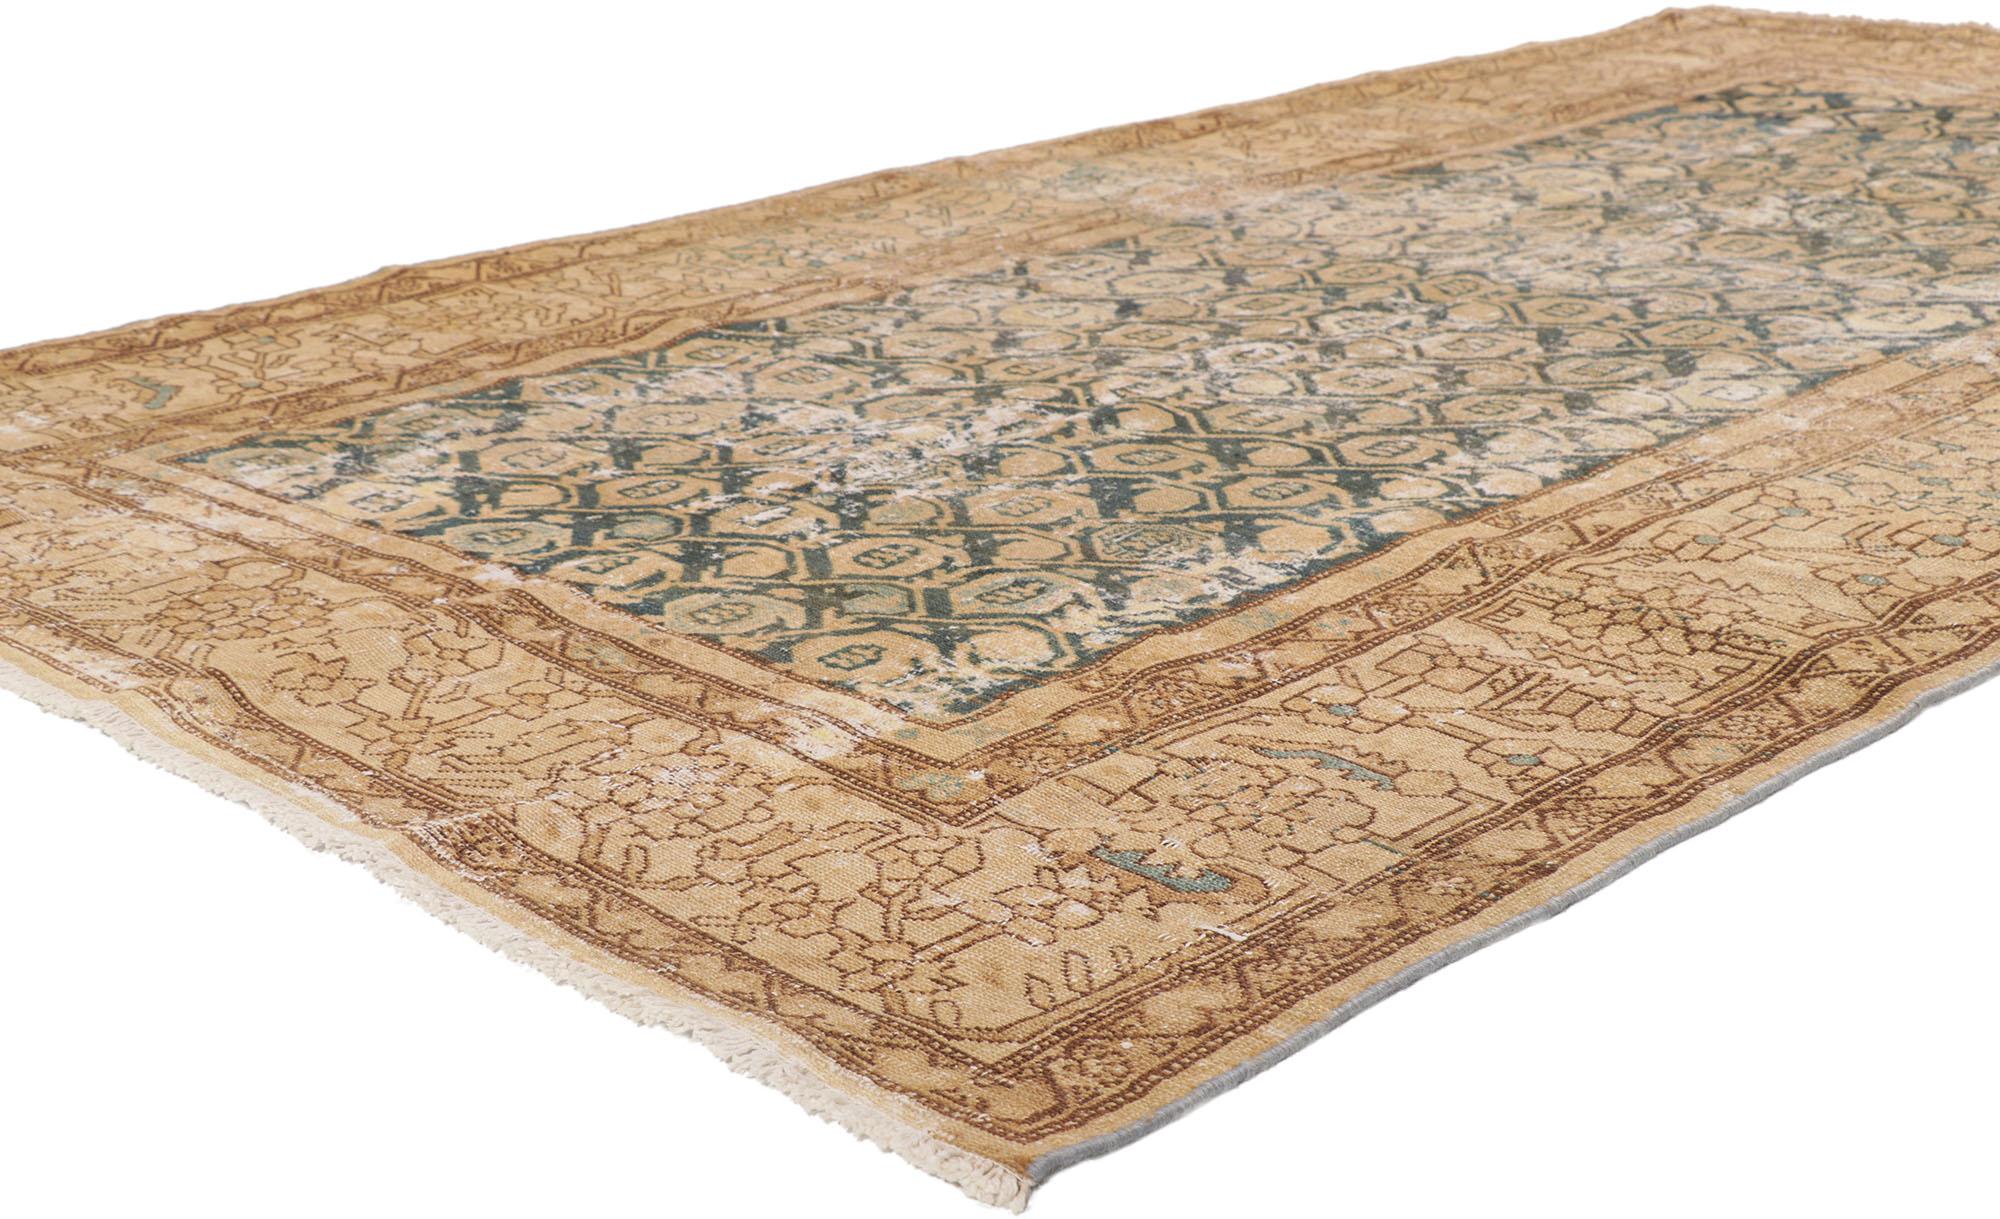 53738 Distressed Antique-Worn Persian Malayer Rug, 05'01 x 09'00.
Behold the majestic weathered beauty of this hand knotted wool antique Persian Malayer rug. Adorned with an allover boteh motif design, this Persian gallery rug boasts a rustic yet